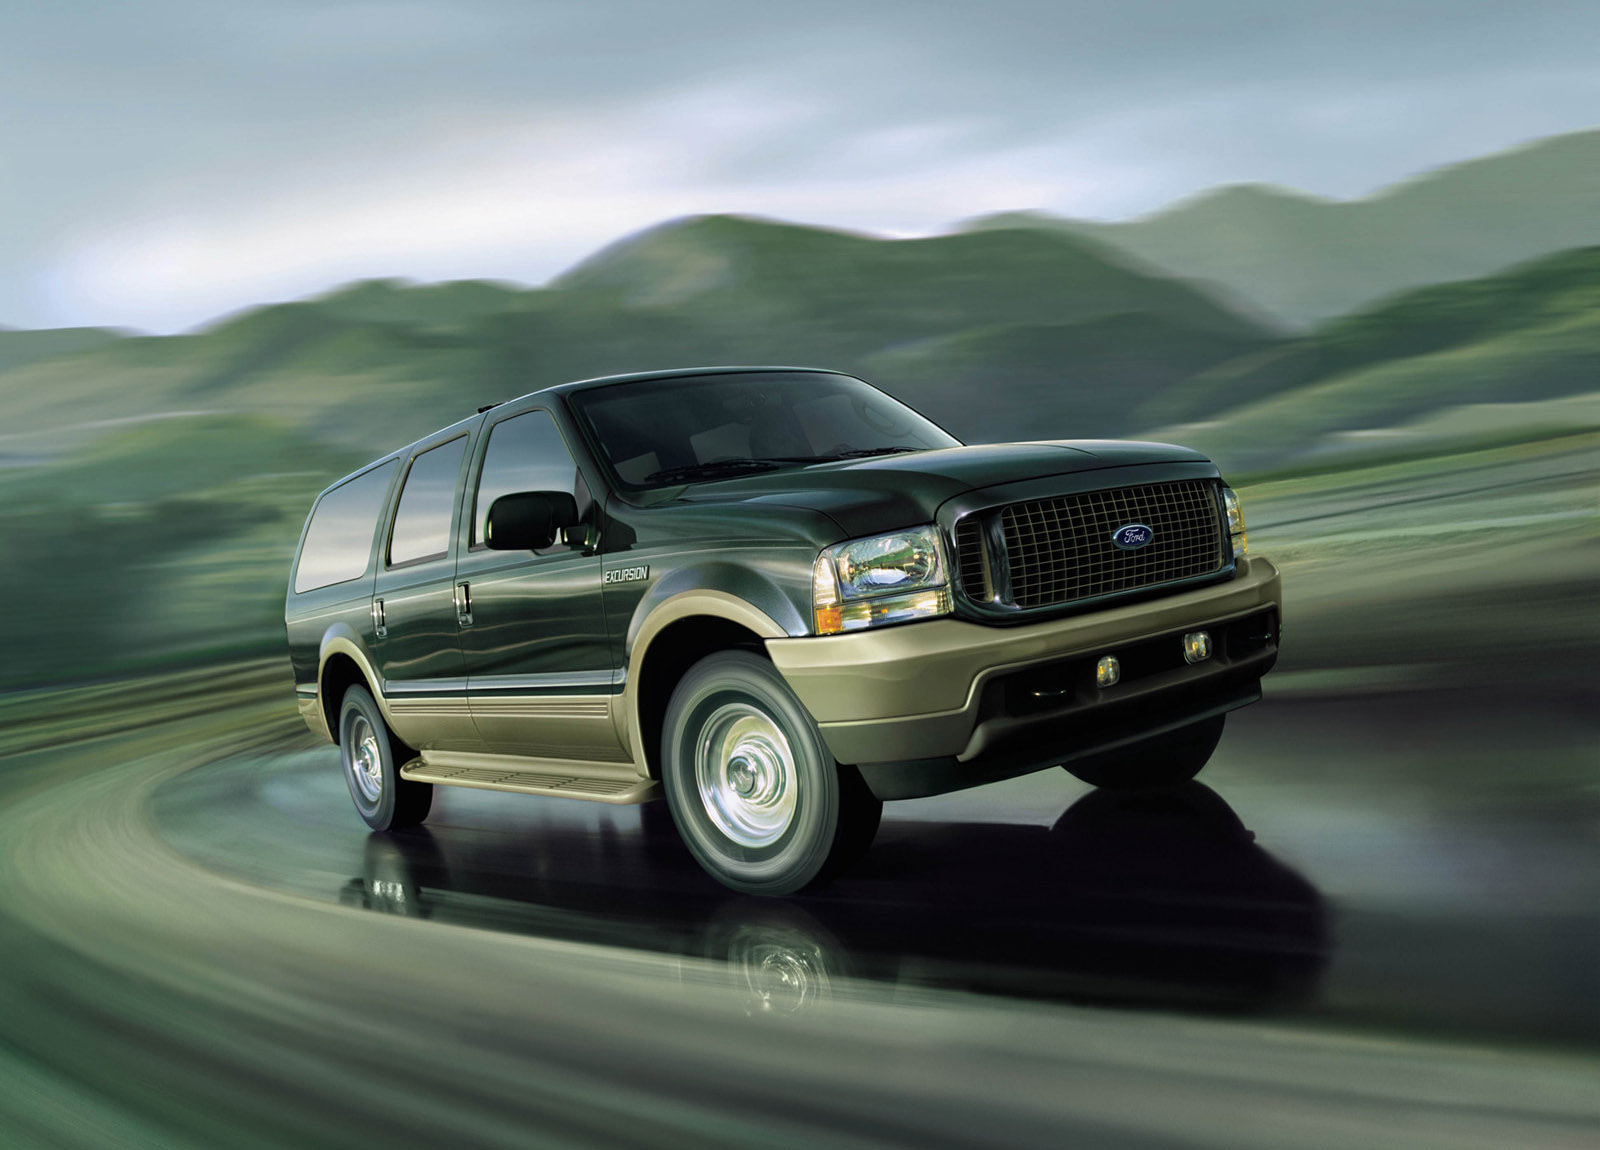 2003 ford excursion 5.4 life expectancy